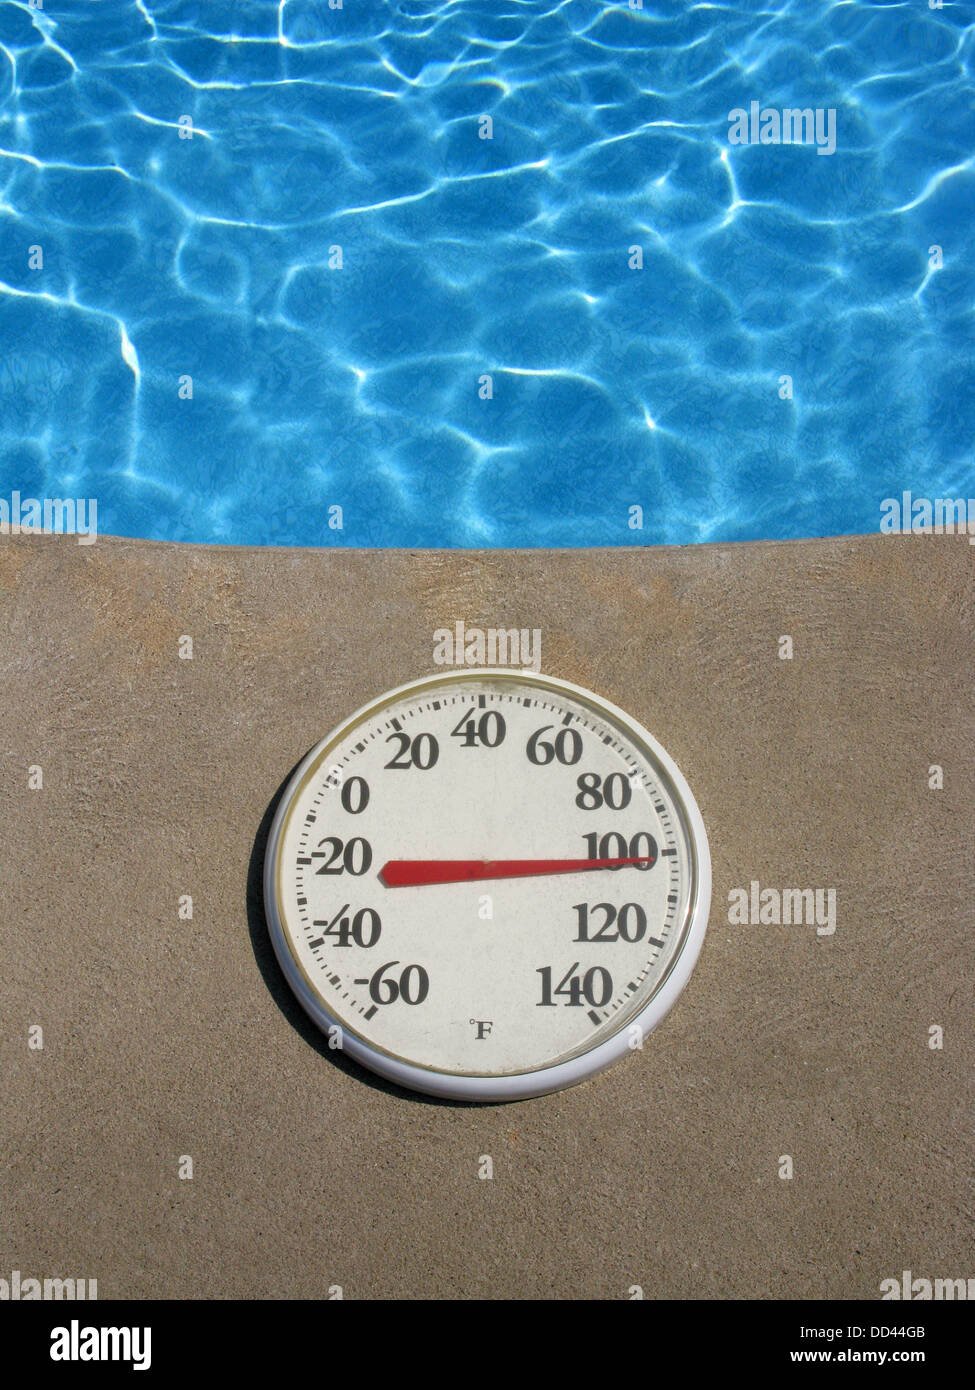 A round plastic thermometer showing hot temperature. Object is next to a swimming pool of blue water Stock Photo